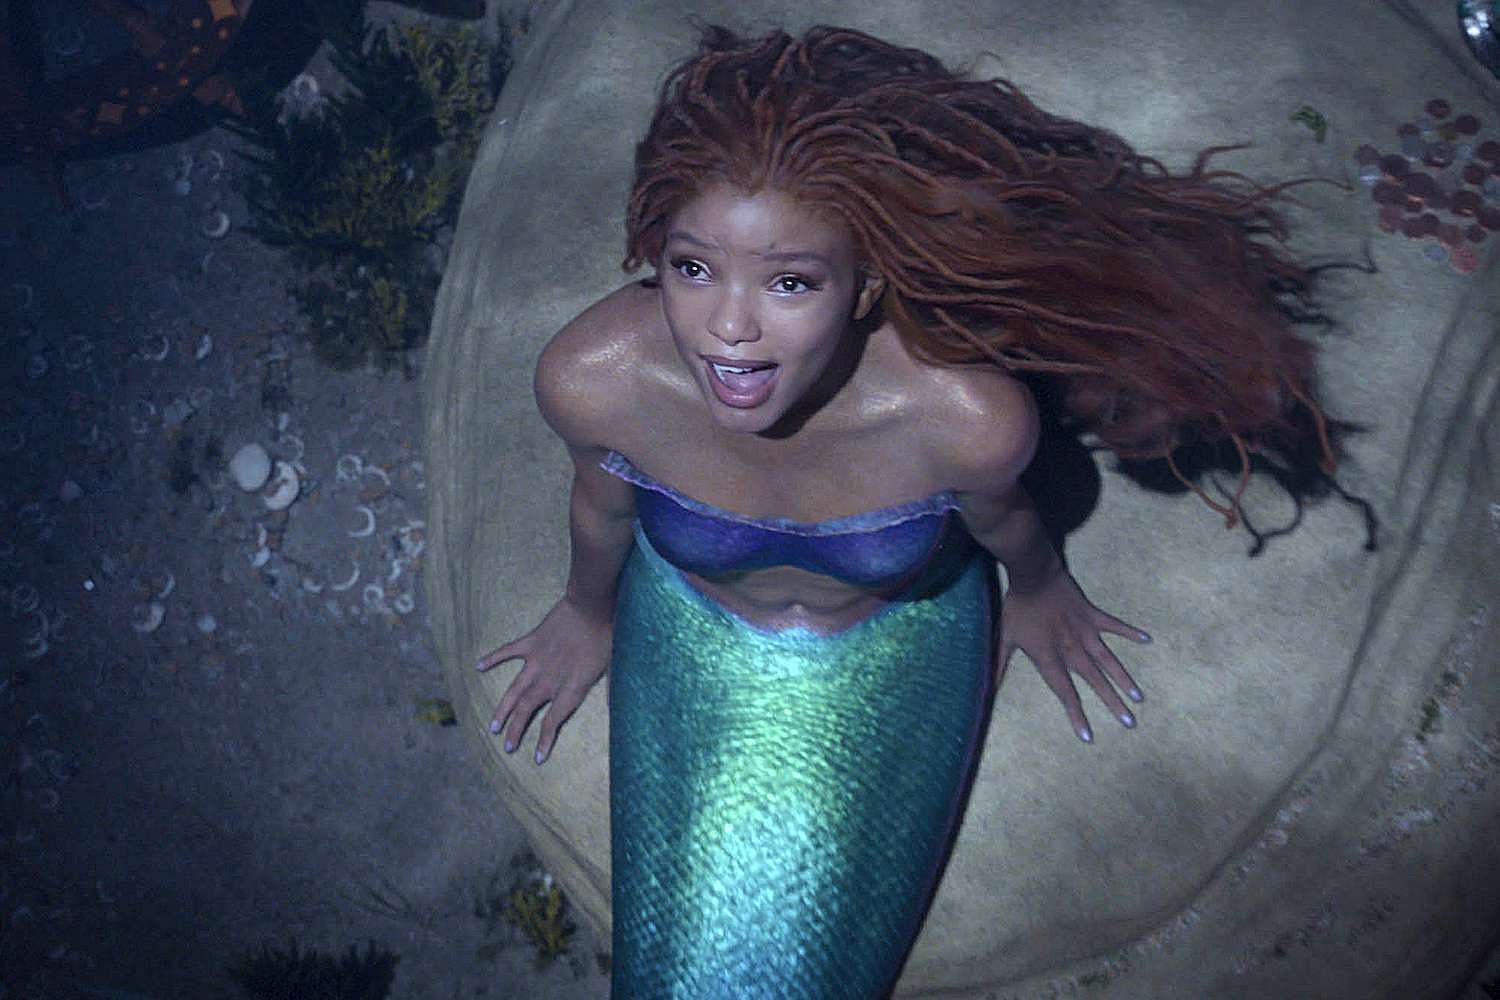 Halle Bailey, a woman of color, portrays Ariel, the little mermaid, which has caused controversy among some fans (Image via Disney)